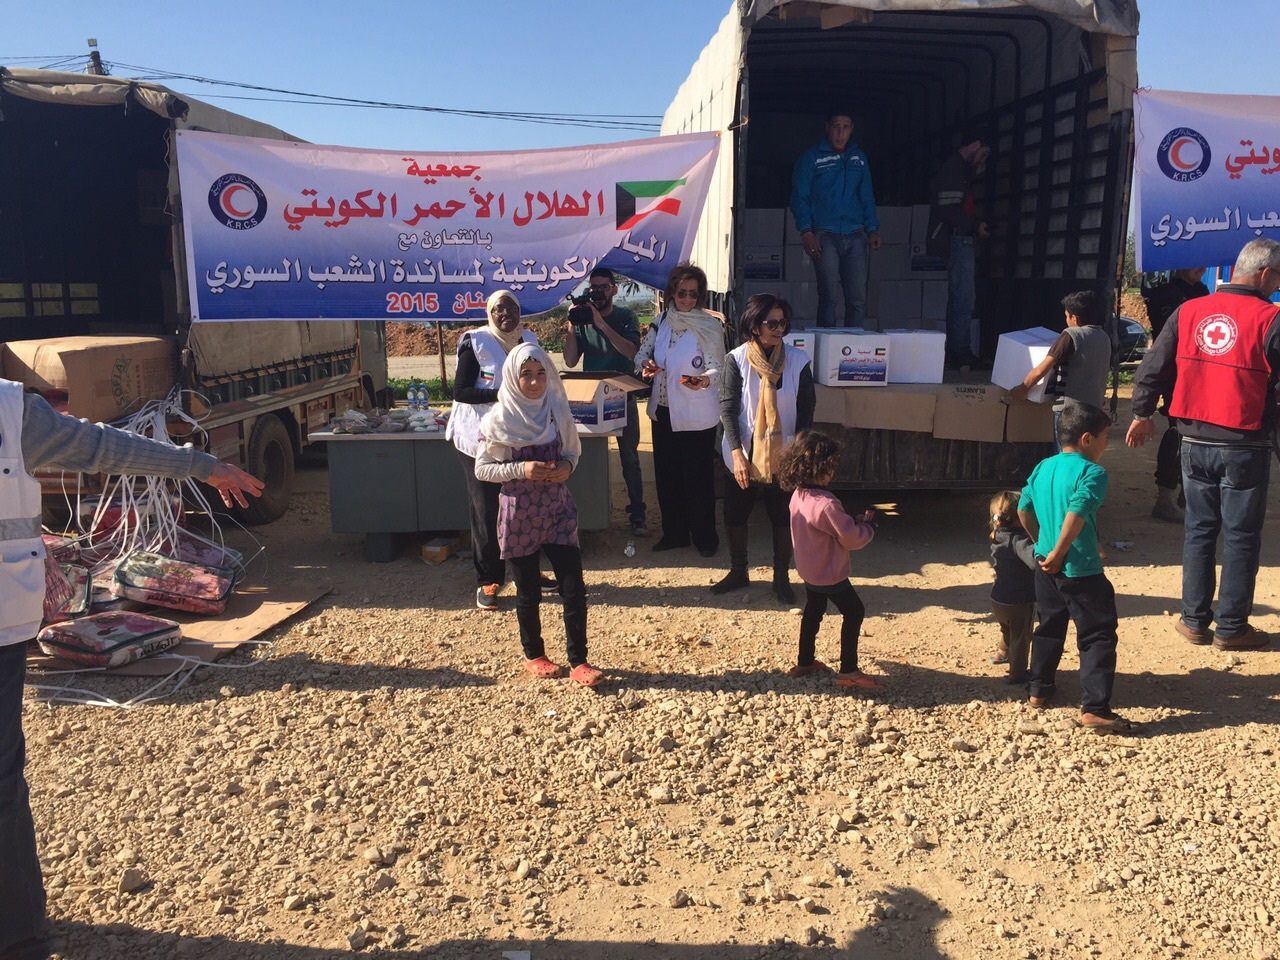 Kuwaiti delegation distributes aid to 350 Syrian displaced families in Lebanon